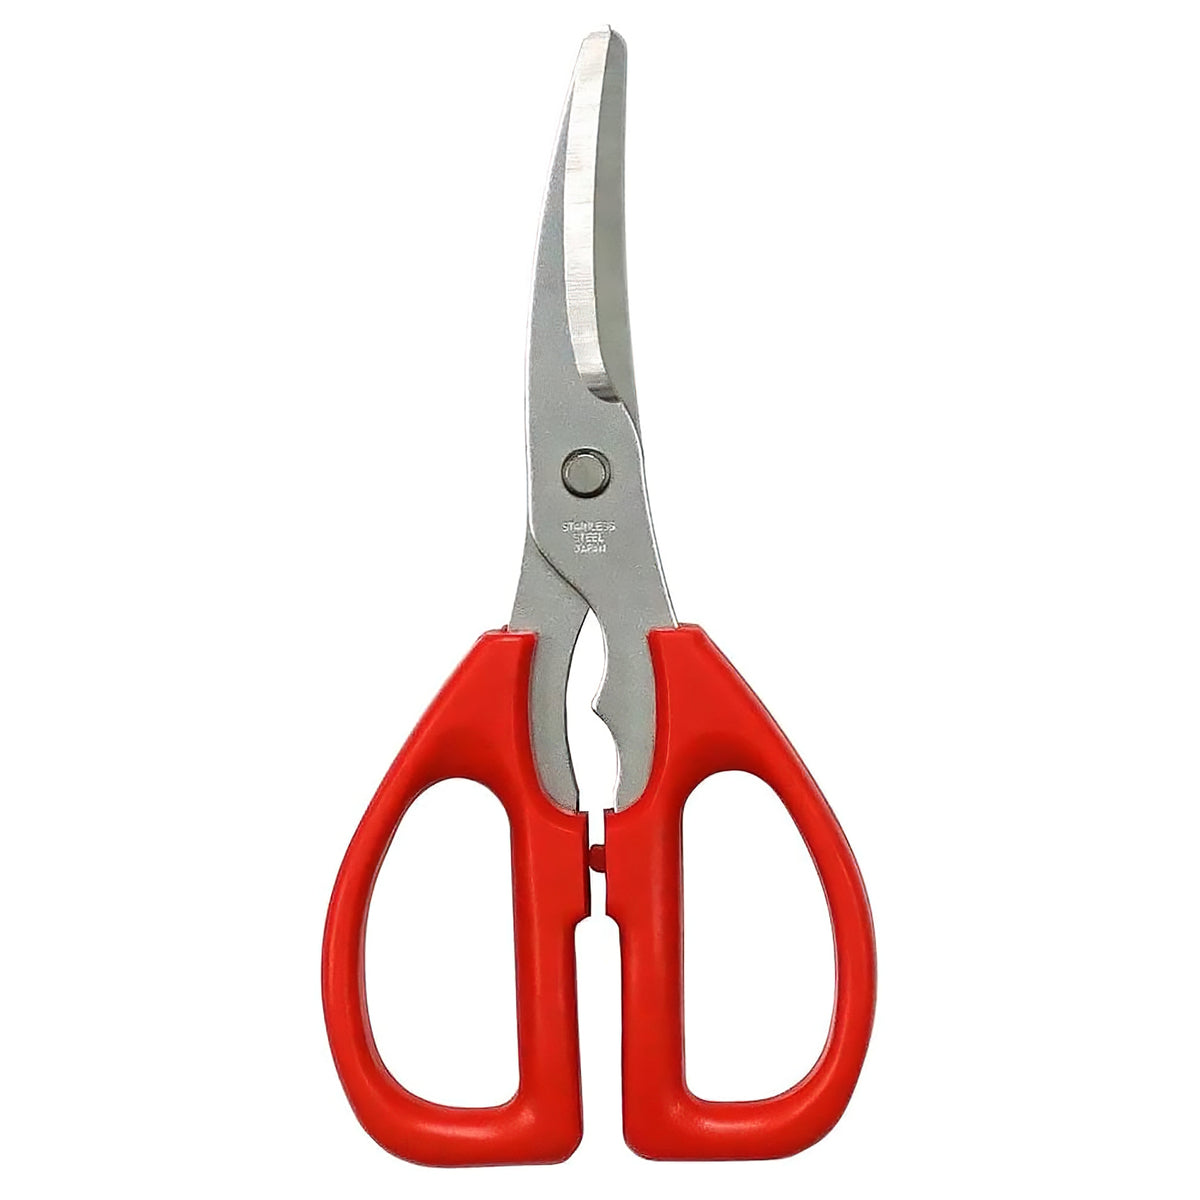 TOP GOODS Stainless Steel Crab Cutter Seafood Scissors